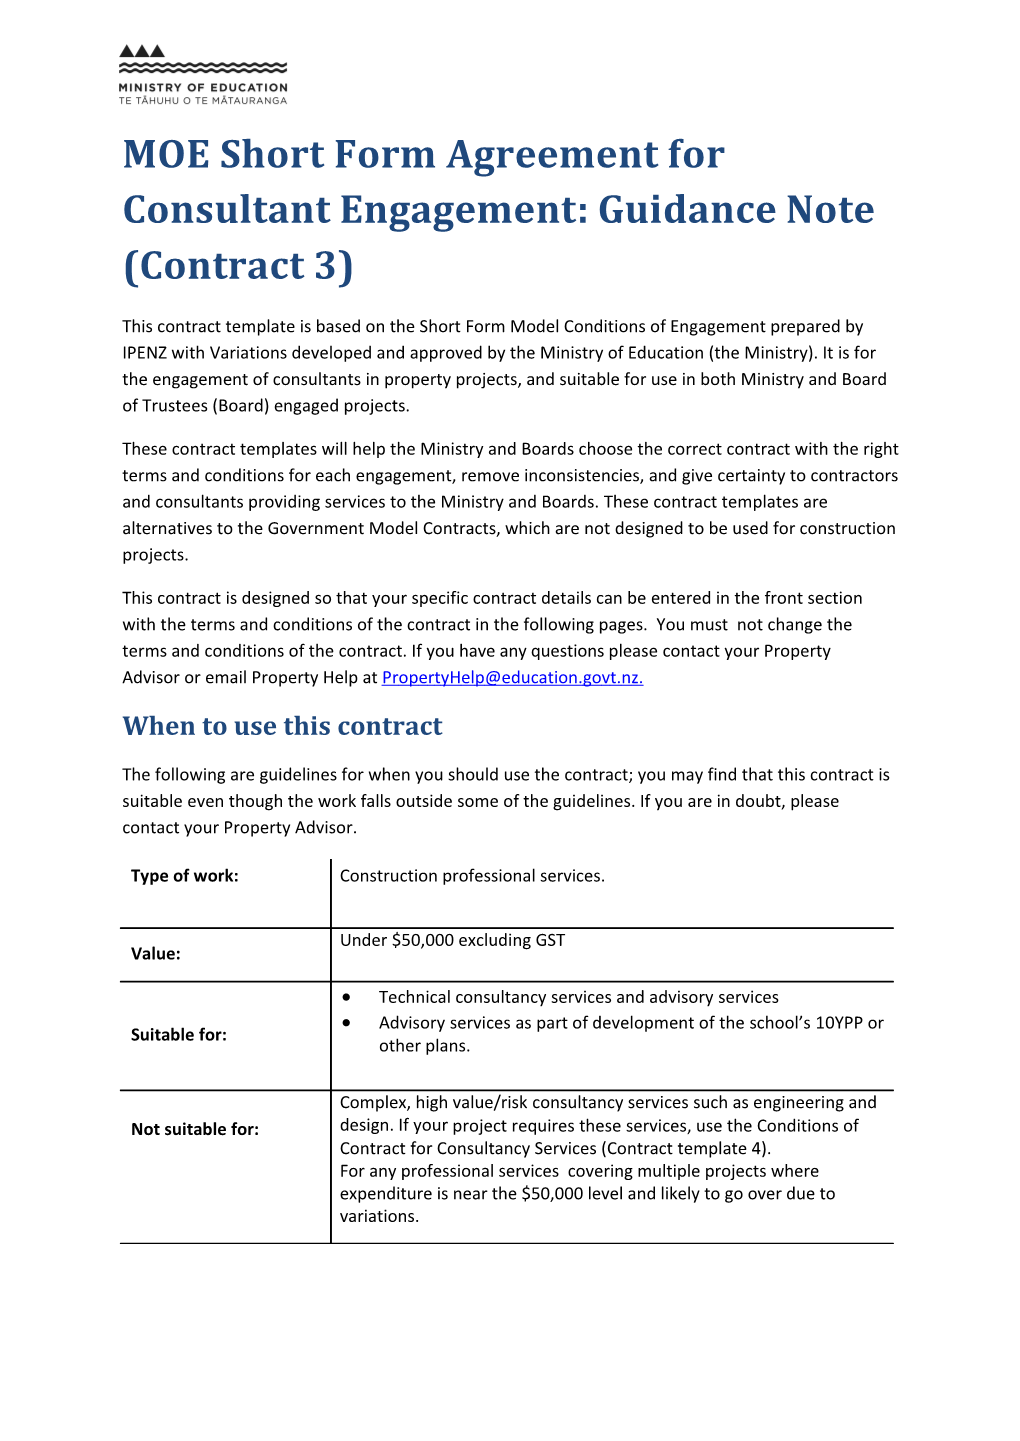 MOE Short Form Agreement for Consultant Engagement: Guidance Note Contract 3